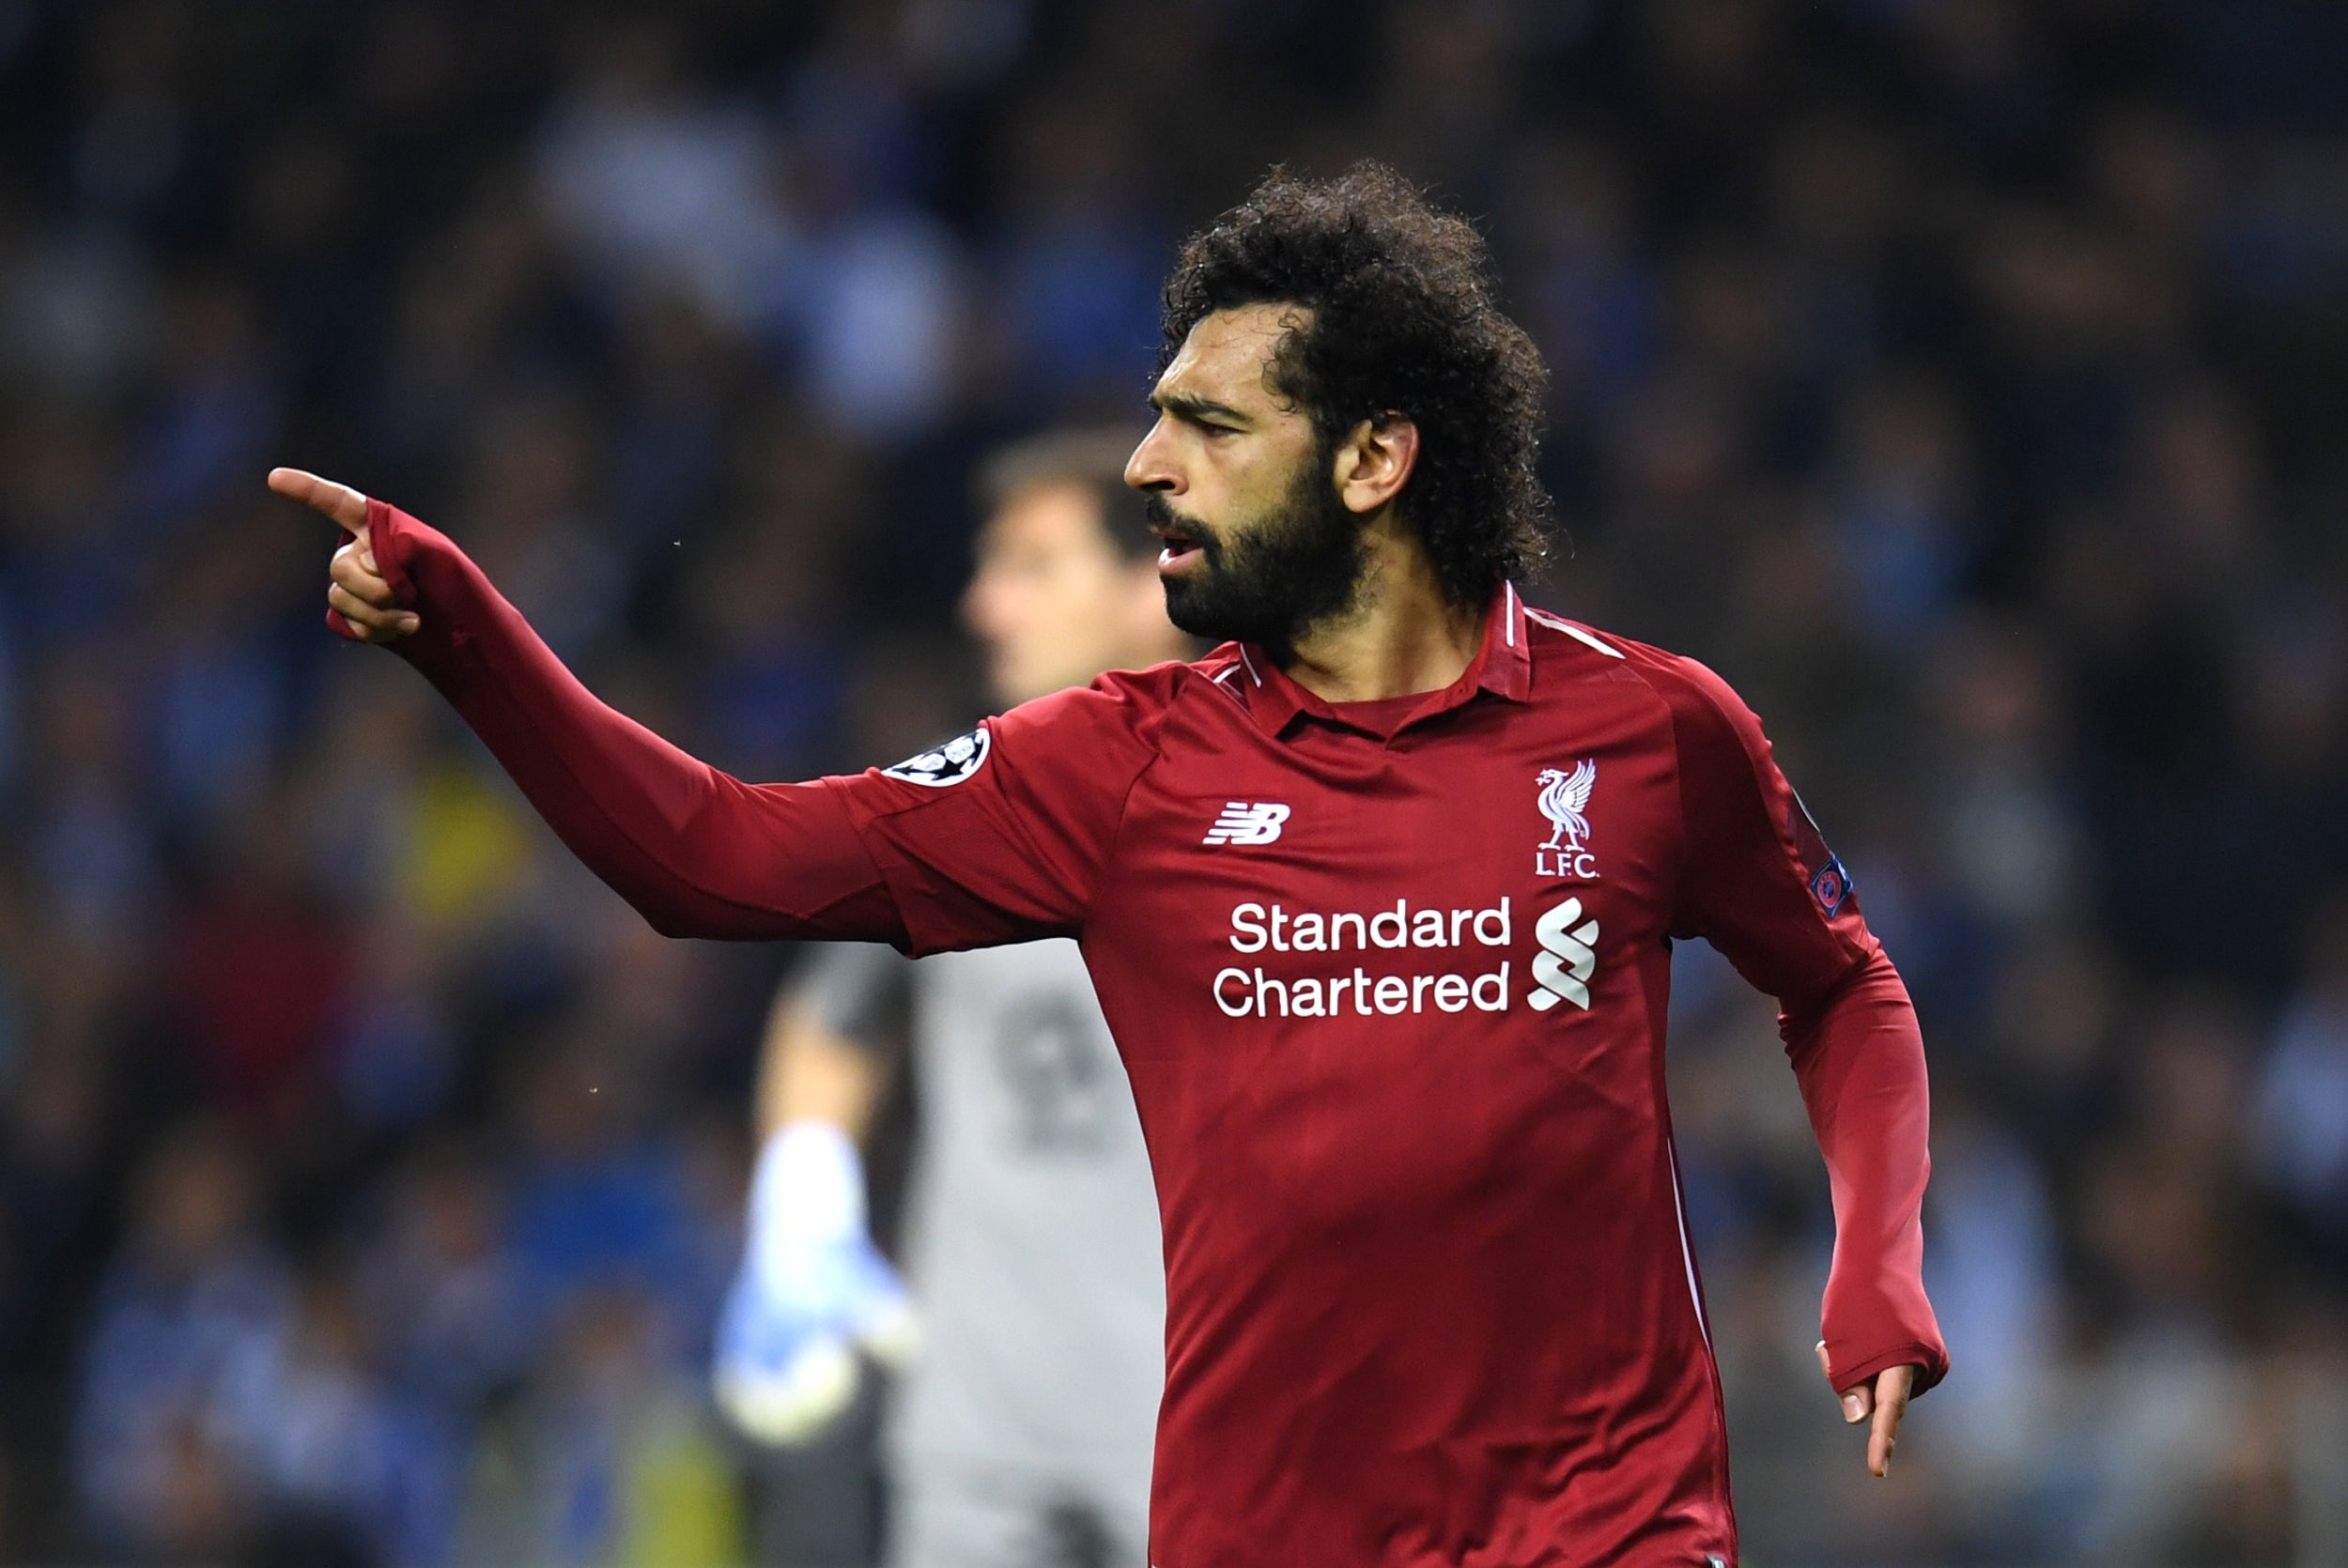 Porto vs Liverpool, player ratings: Mohamed Salah and Trent Alexander-Arnold star in heavy win